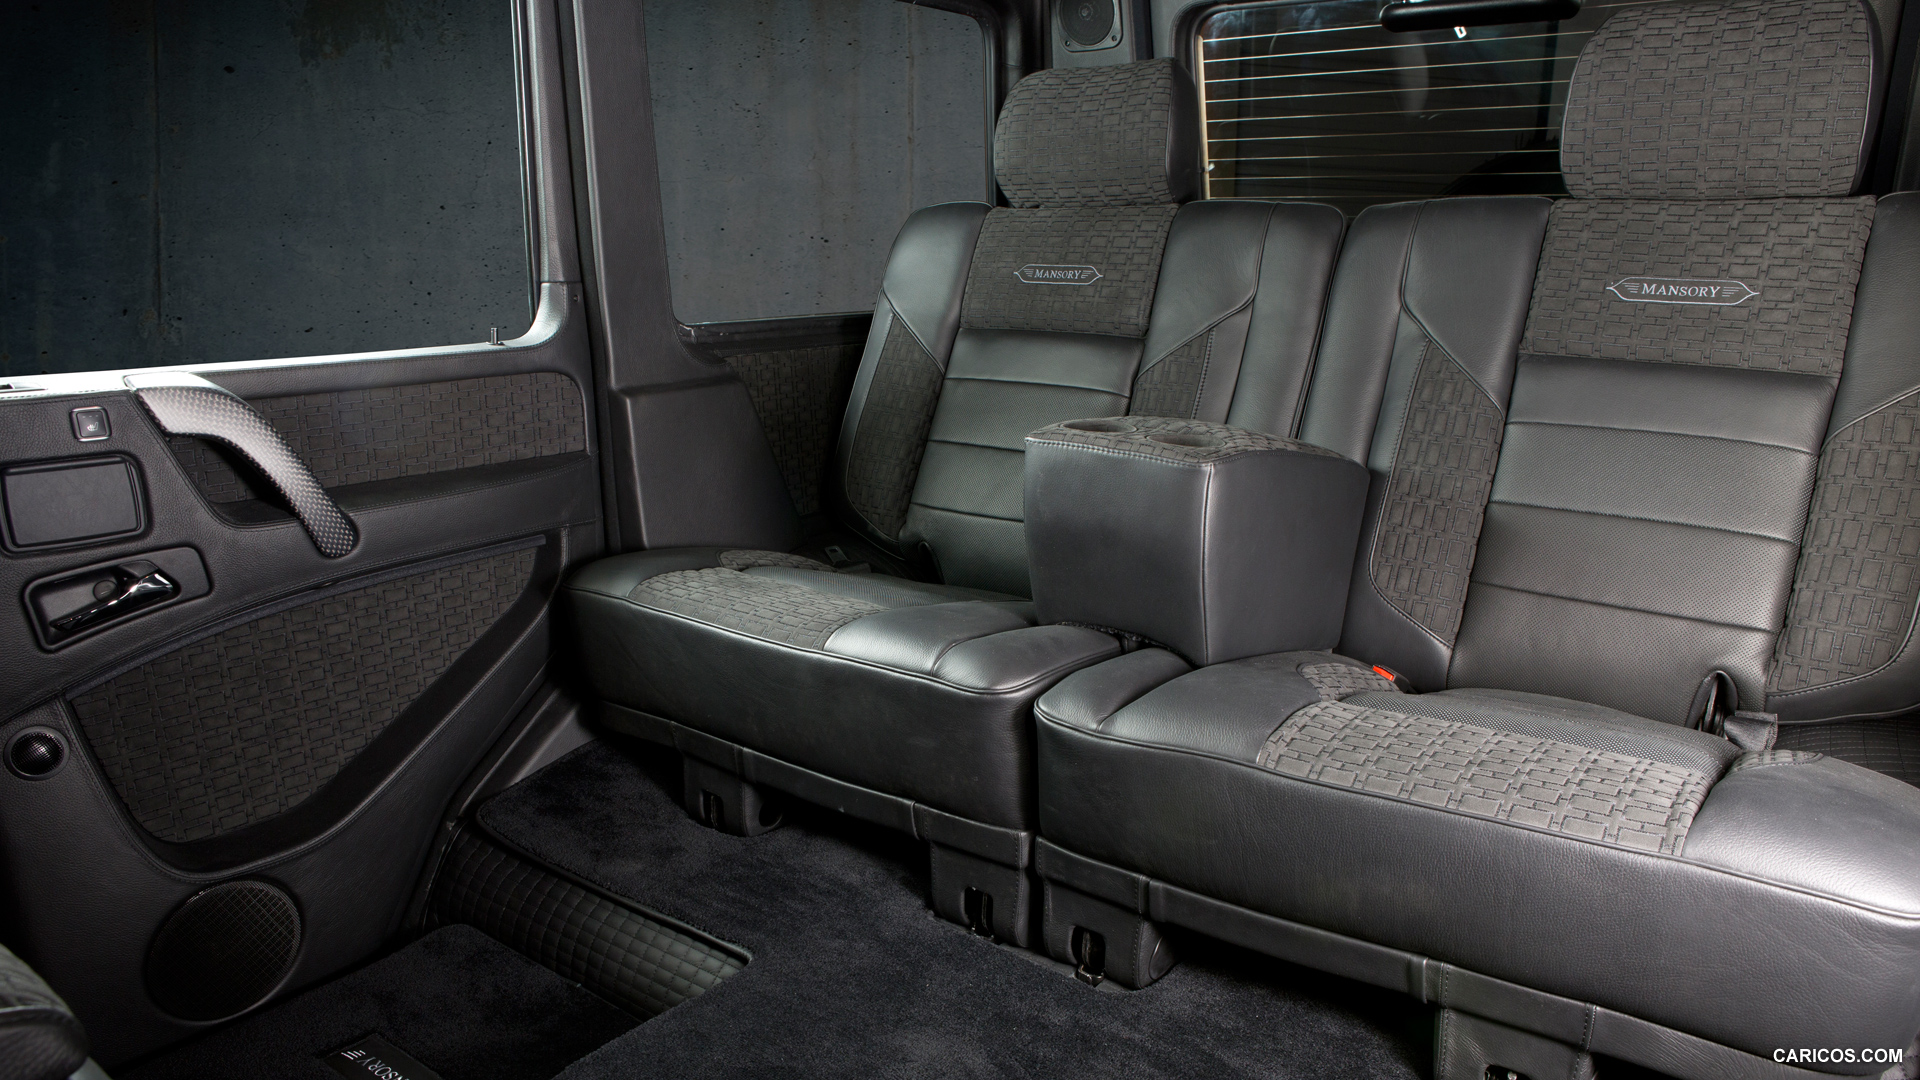 2014 Mansory Gronos based on Mercedes-Benz G-Class AMG  - Interior Rear Seats, #6 of 6